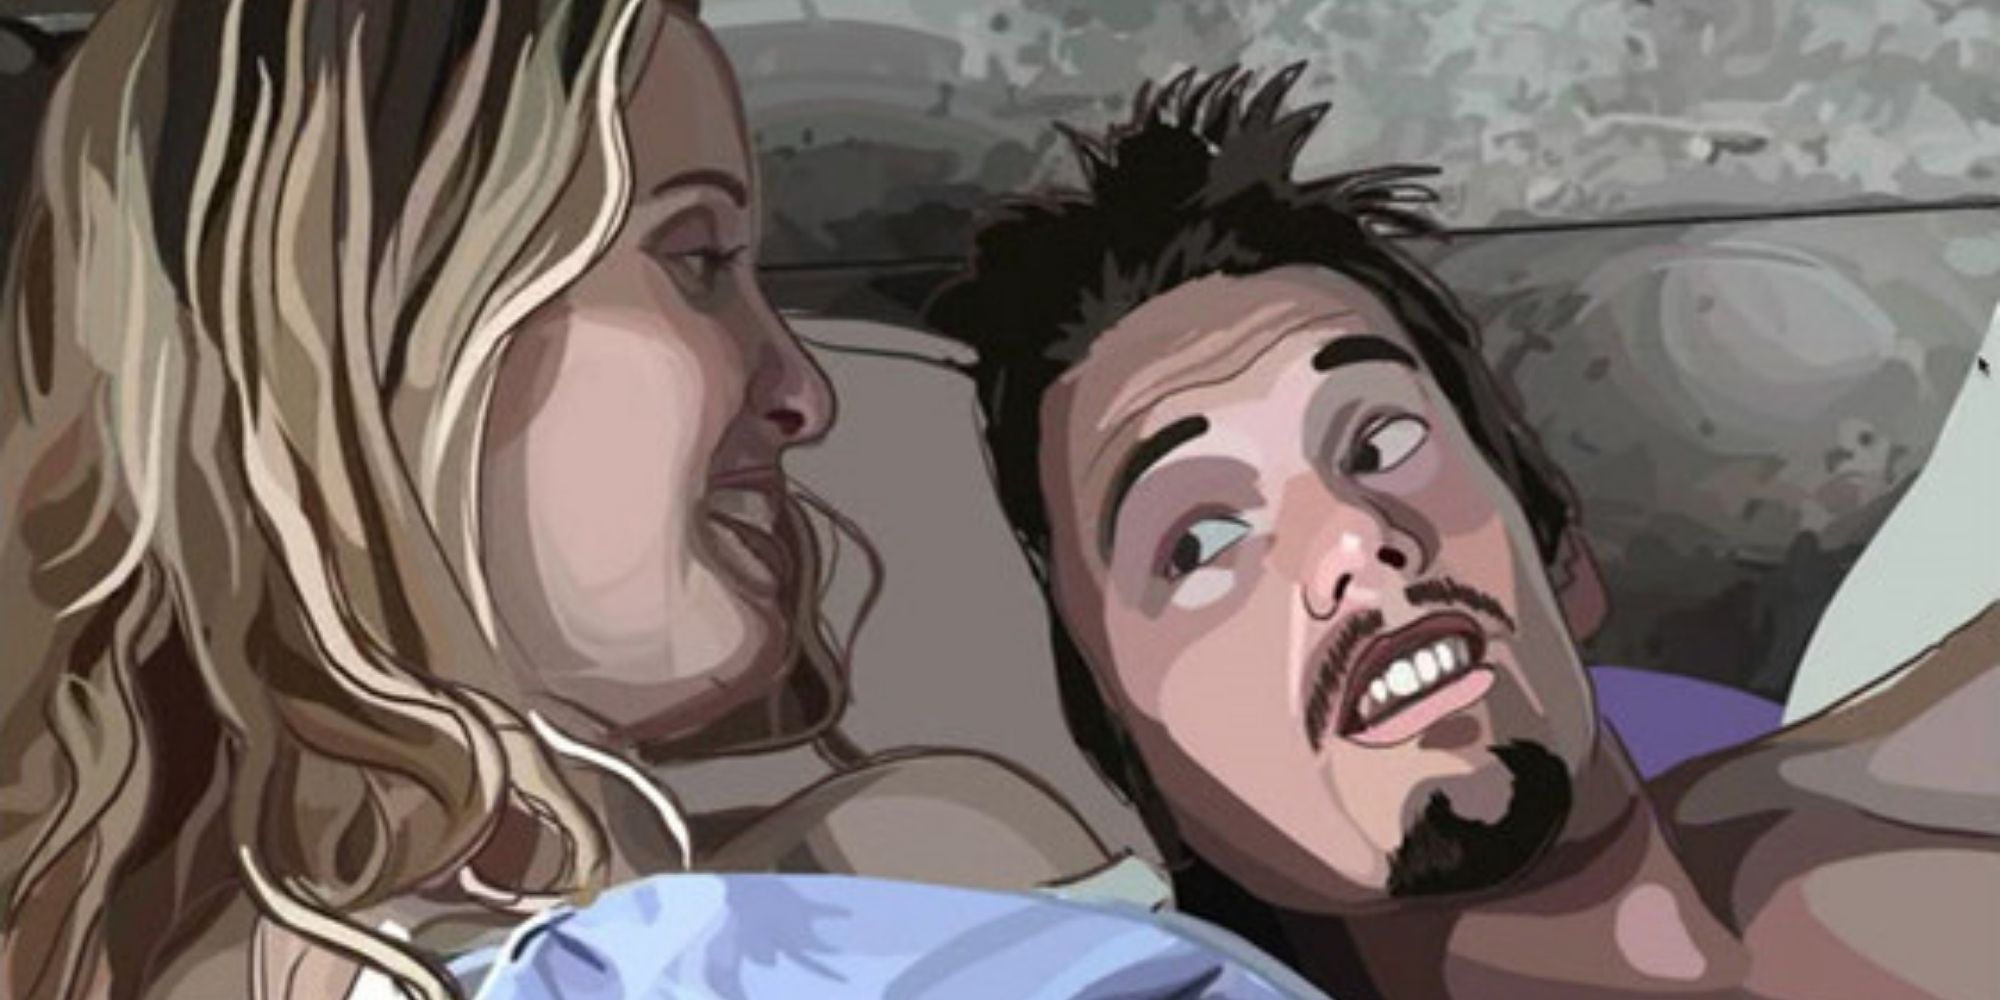 Ethan Hawke and Julie Delpy in Waking Life